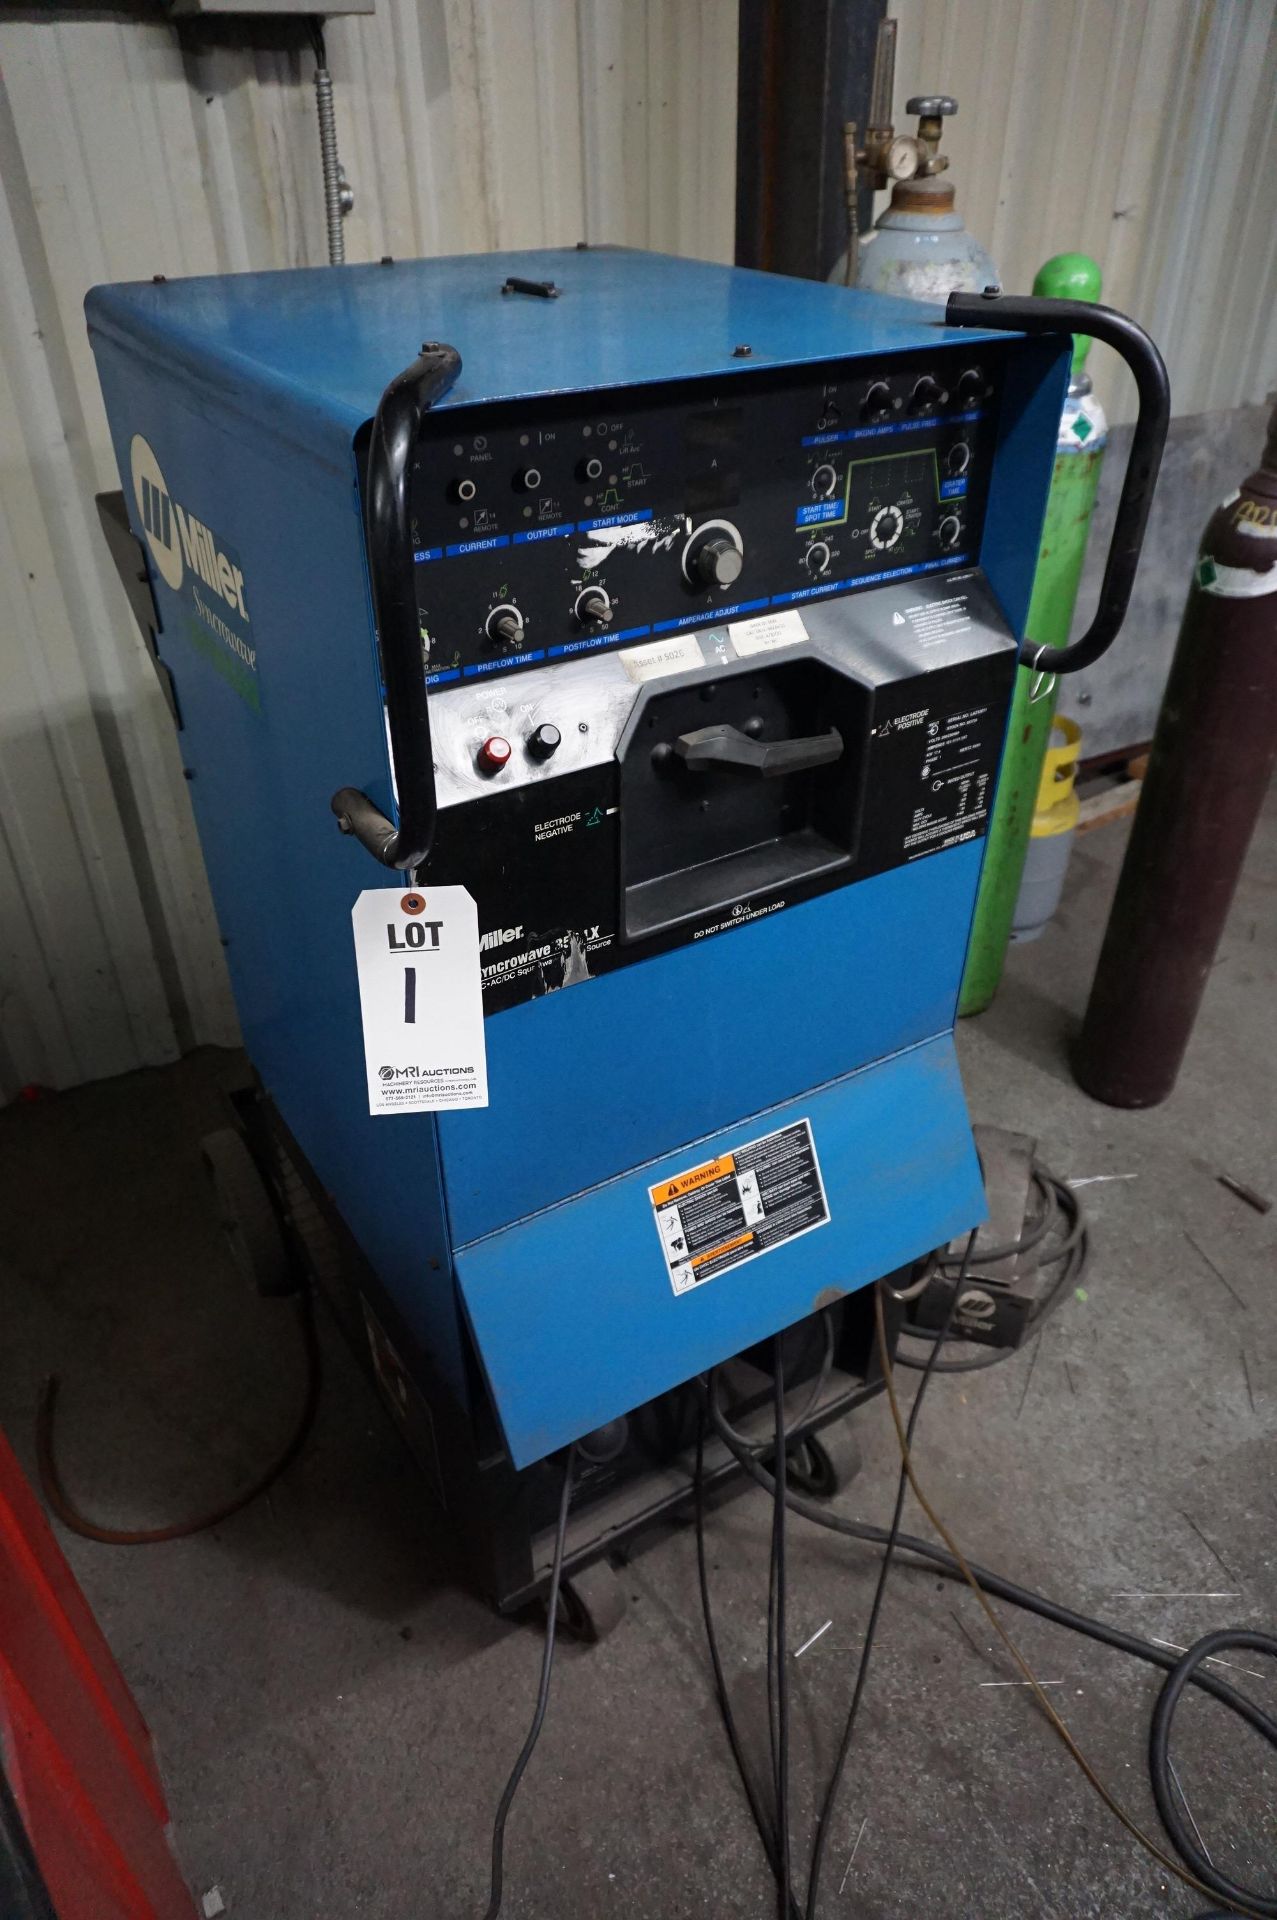 MILLER SYNCROWAVE 350 LX AC/DC SQUARE WAVE SOURCE WELDER, STOCK NO. 903736, S/N LA213011, WITH